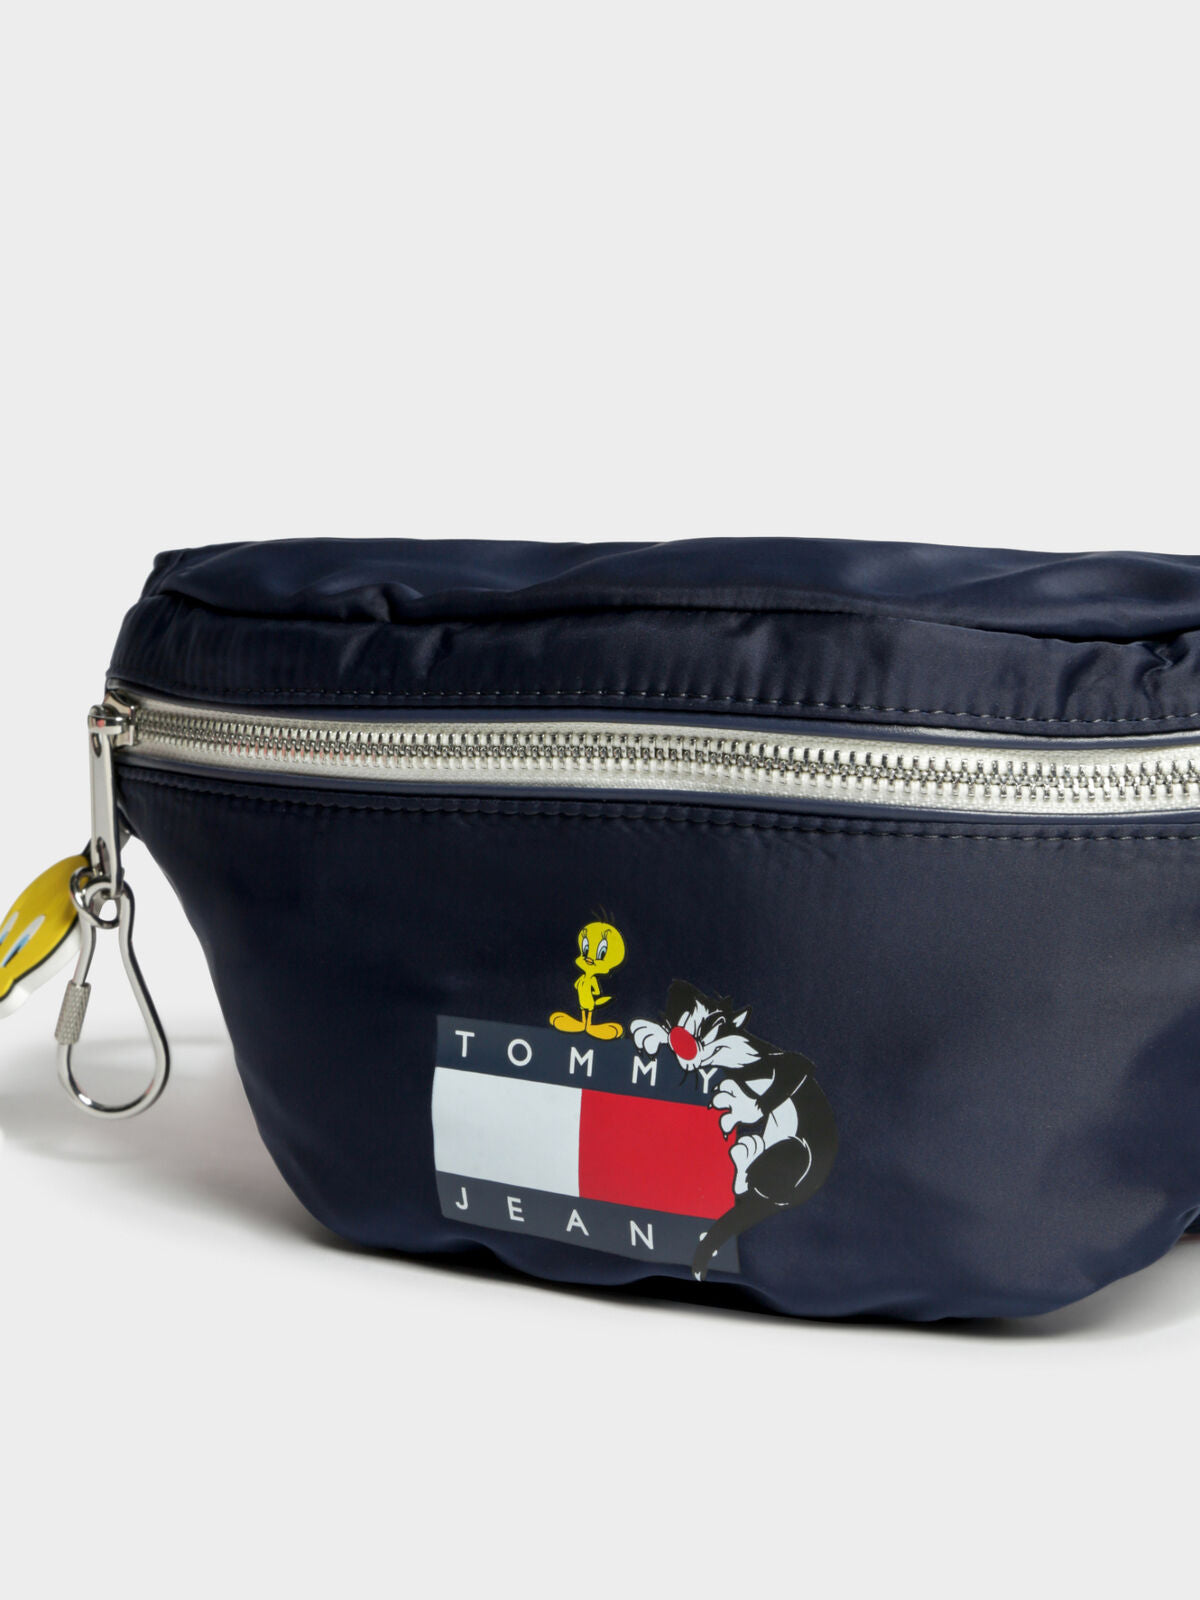 Tommy Jeans x Looney Tunes Bumbag in Twilight Navy